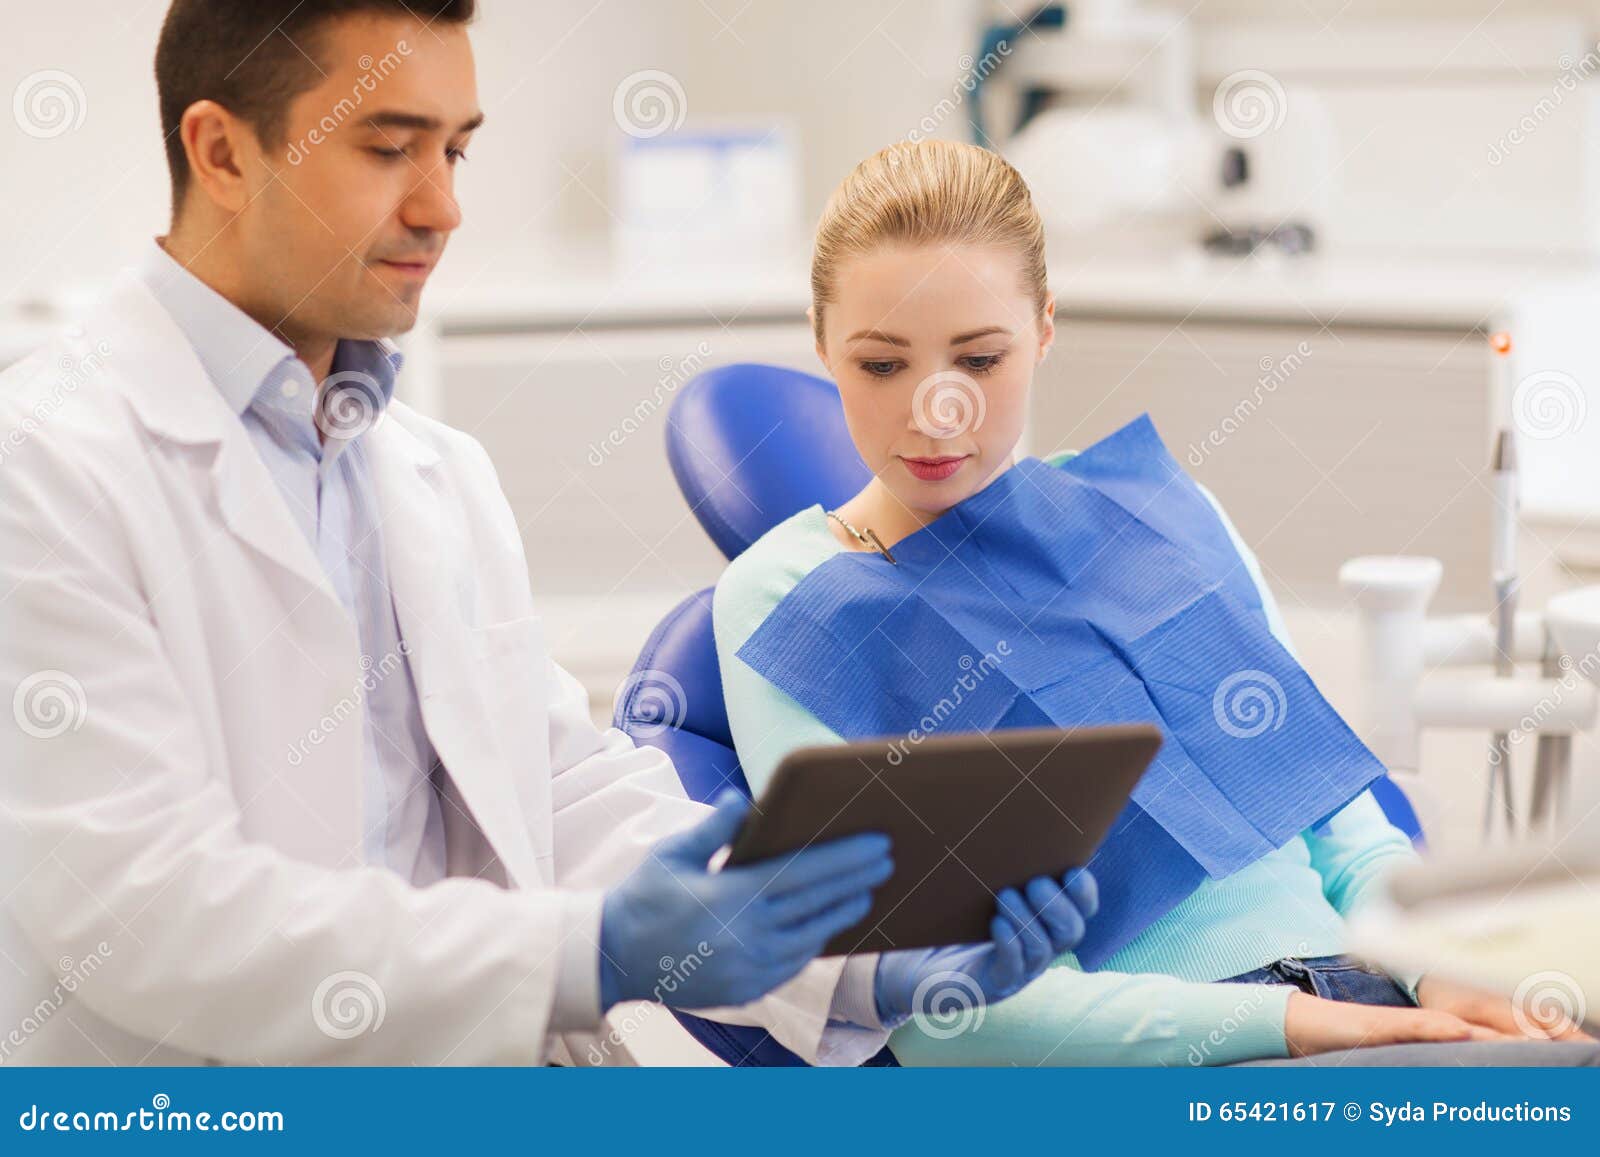  health care concept  male dentist showing tablet pc computer to women